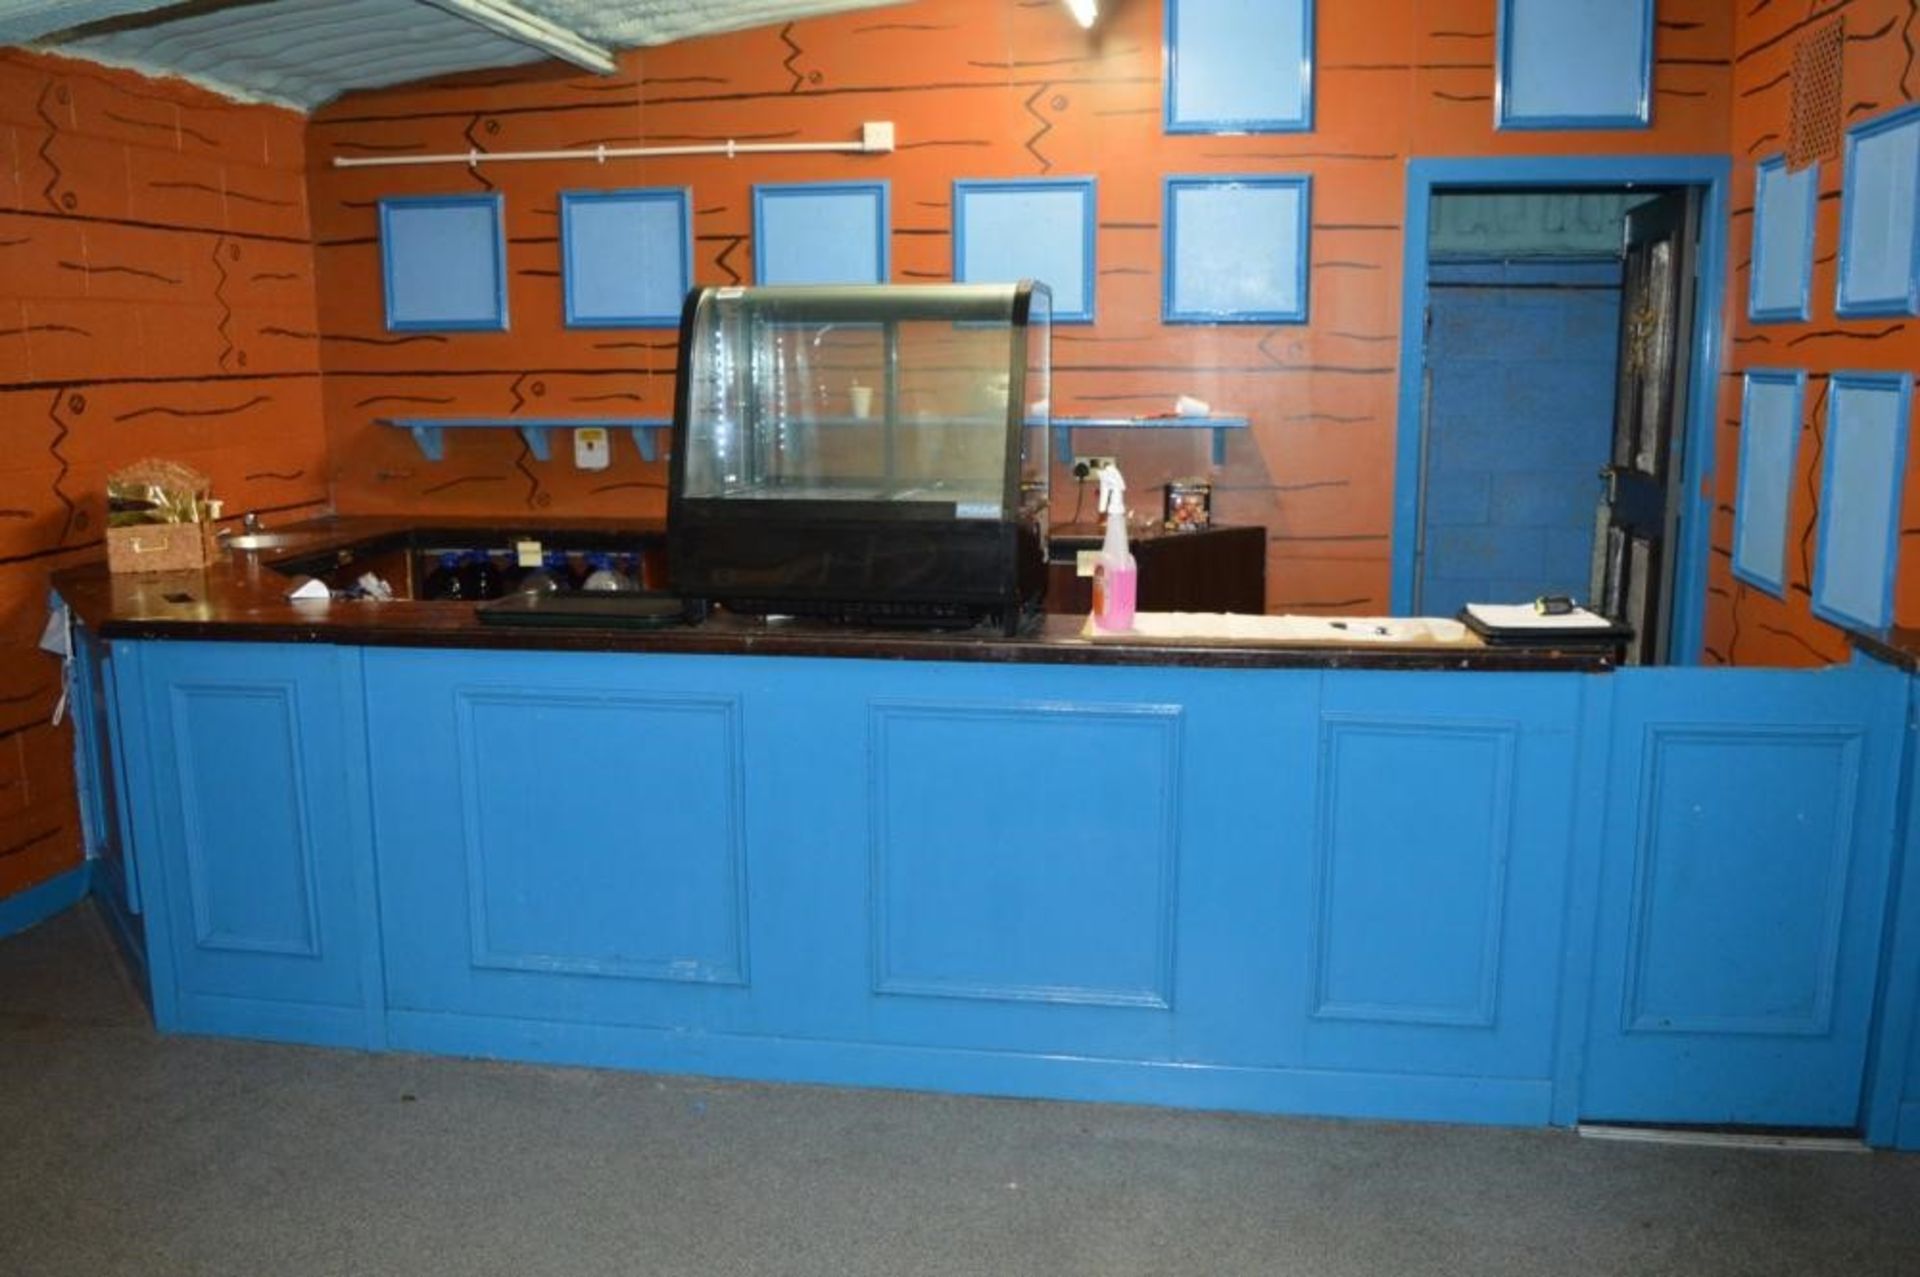 1 x Drinks Bar in Blue With Wooden Counter Top - Includes Backbar Storage and Single Handwash Basin